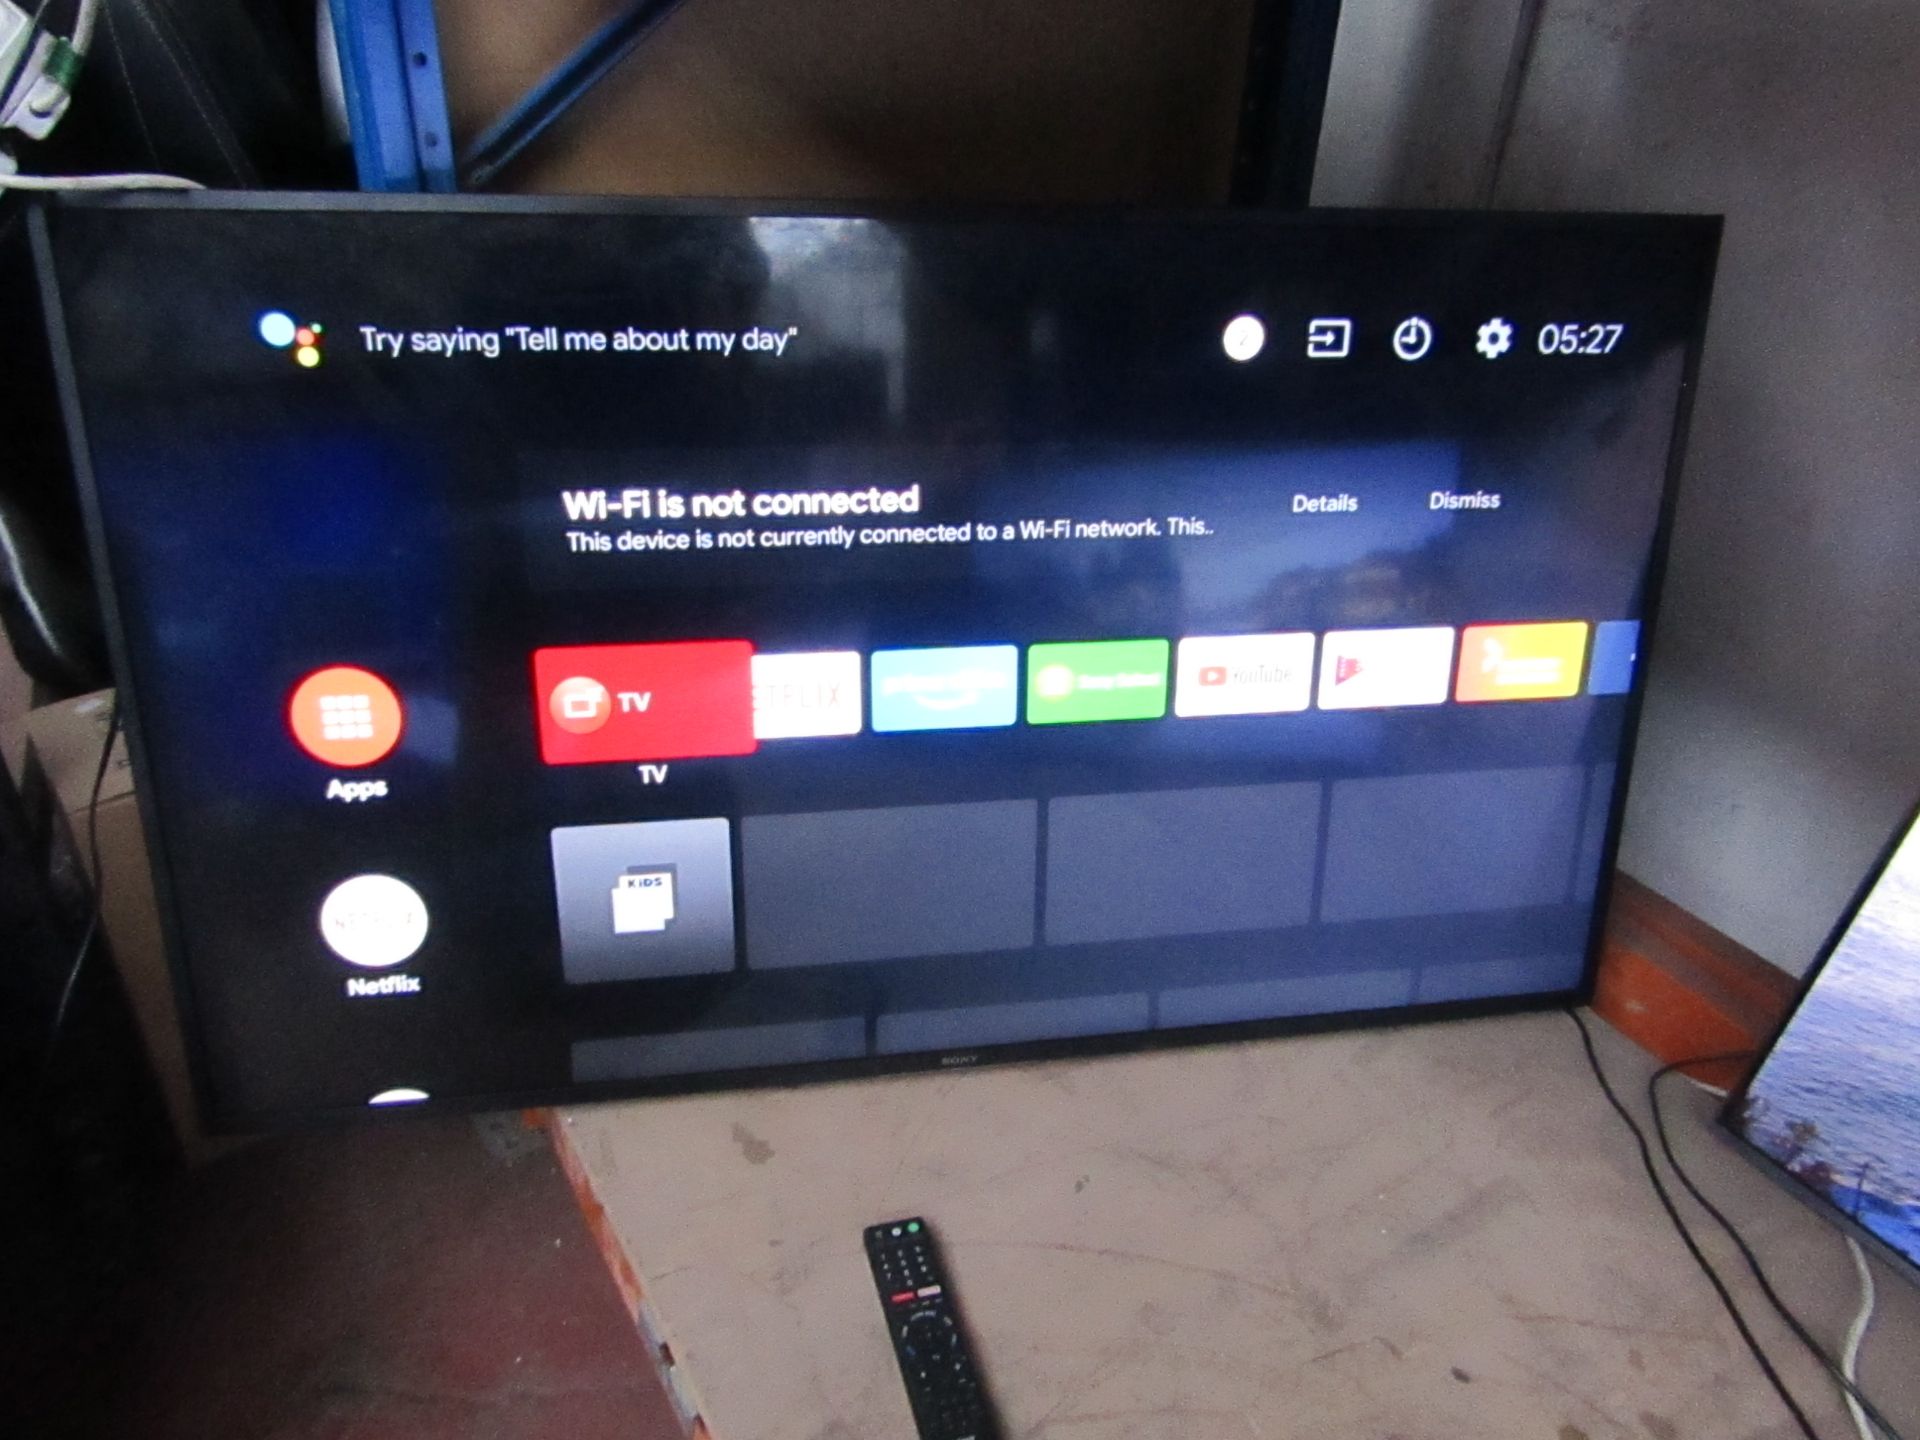 Sony KD55XG8196 55" smart LED TV, tested working with remote control, missing stand and box